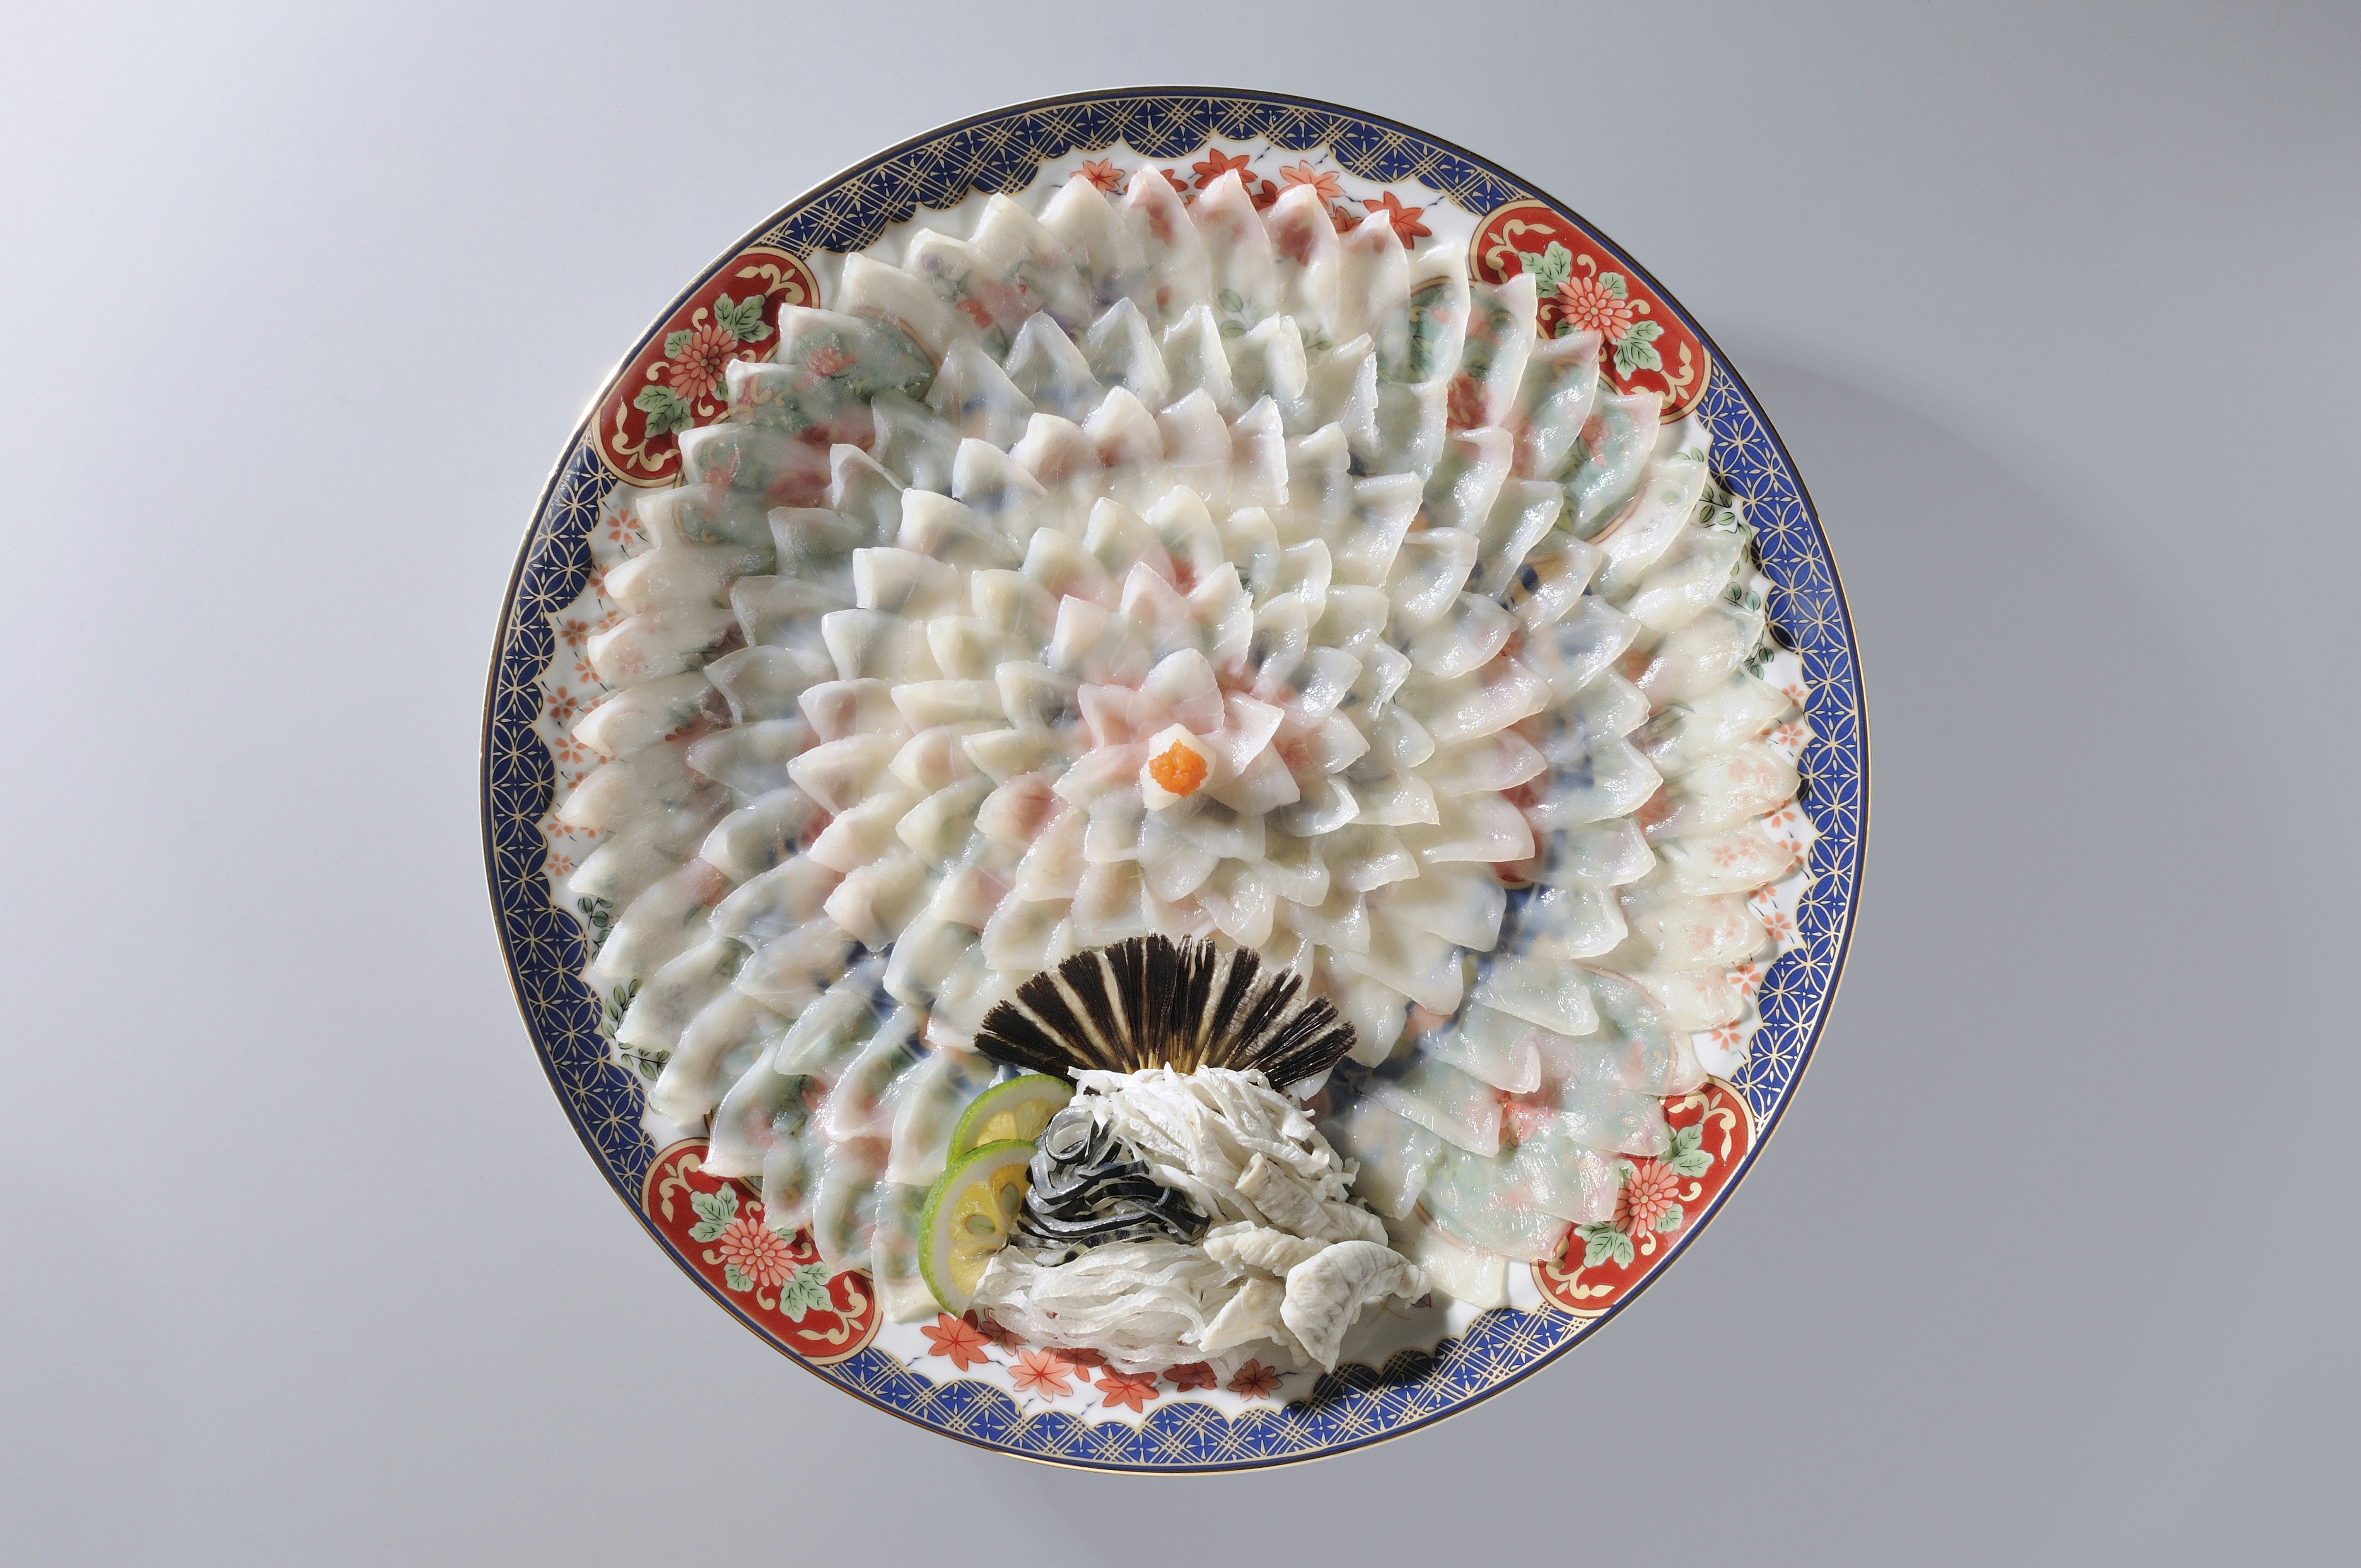 Thinly sliced fugu (puffer fish) is intricately arranged in the shape of a flower on a colorful plate. 